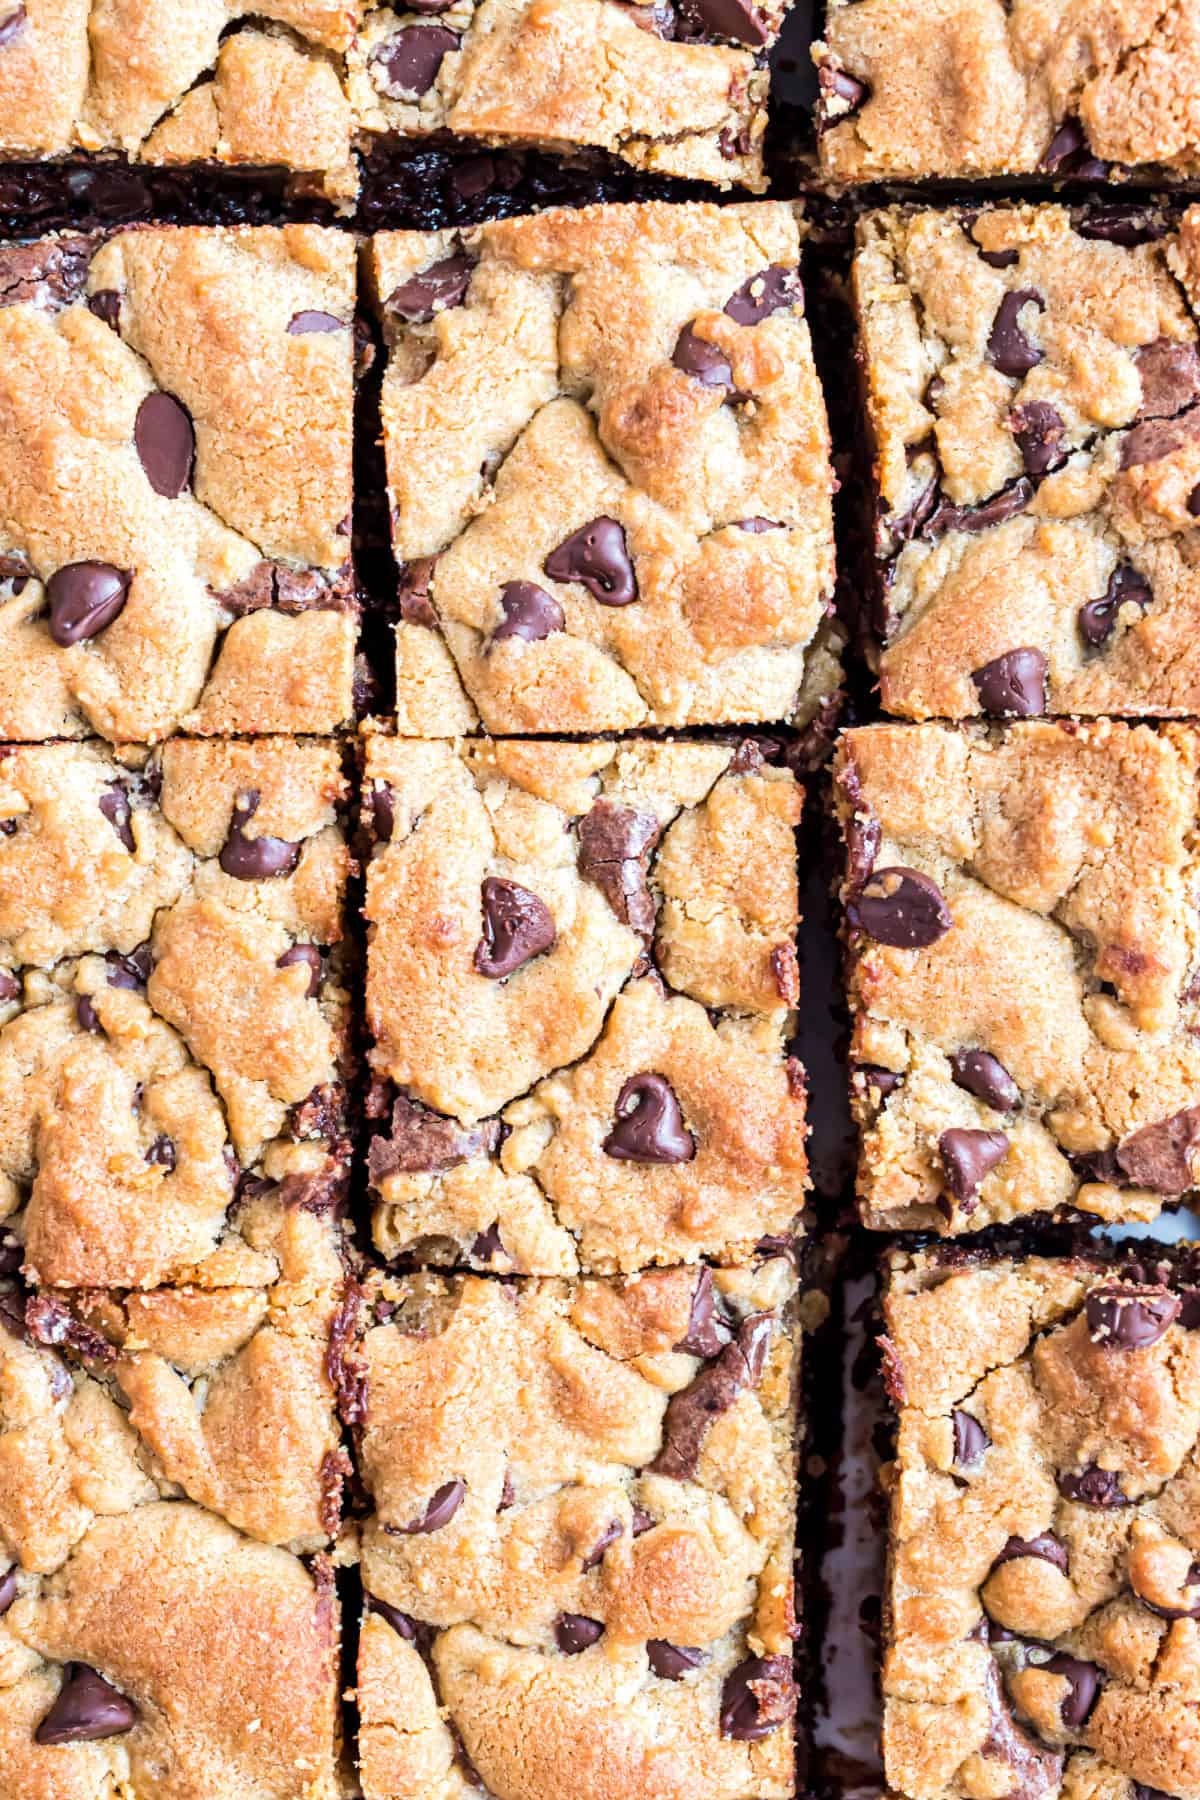 Chocolate chip brownies cut into large squares.